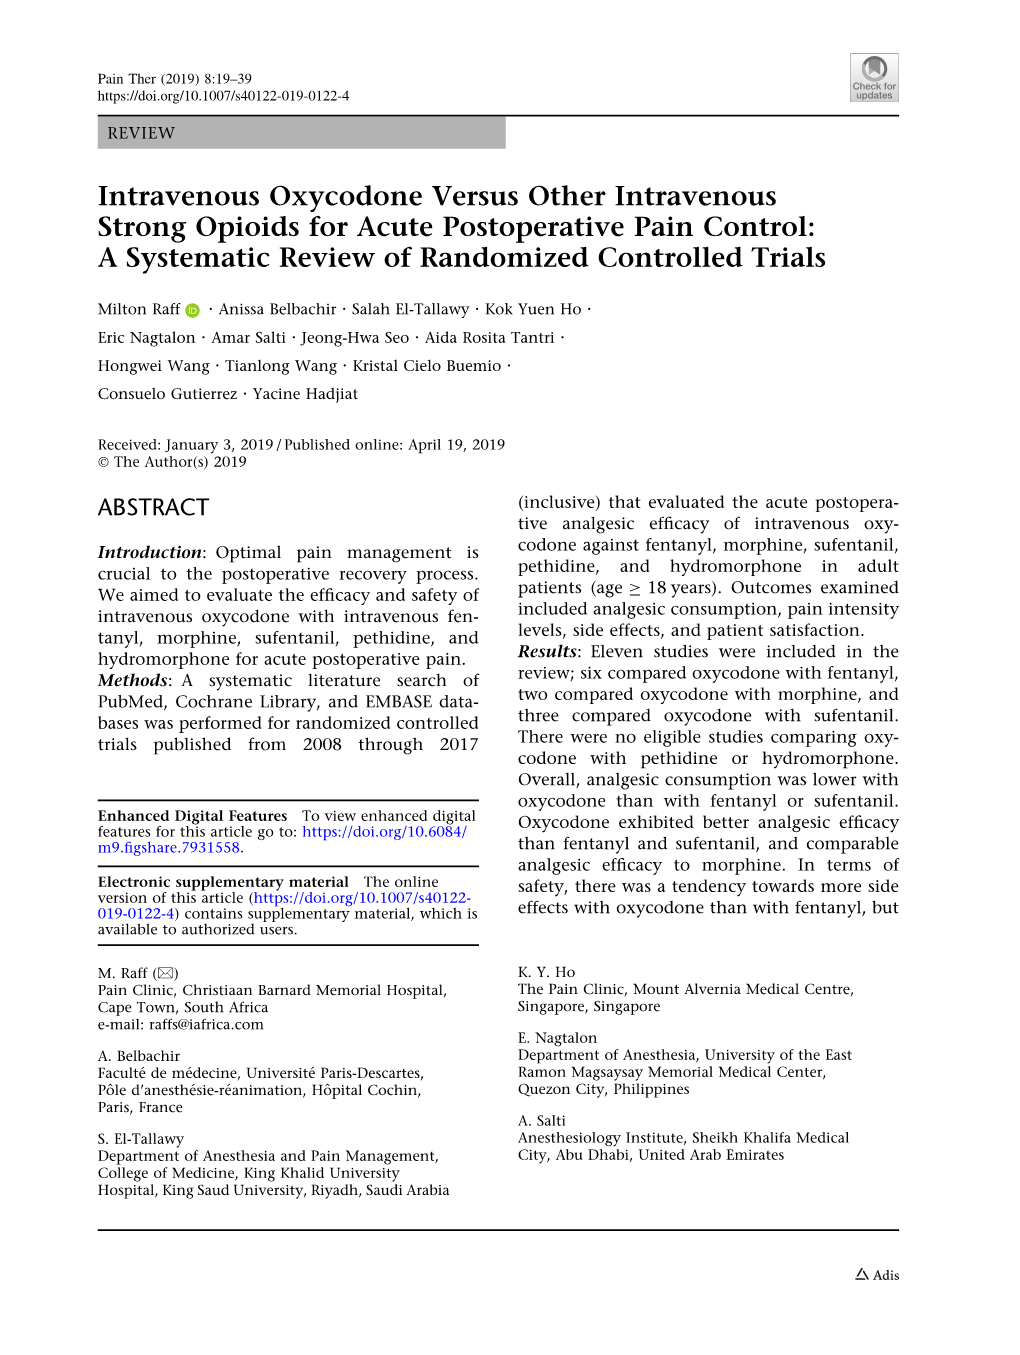 Intravenous Oxycodone Versus Other Intravenous Strong Opioids for Acute Postoperative Pain Control: a Systematic Review of Randomized Controlled Trials